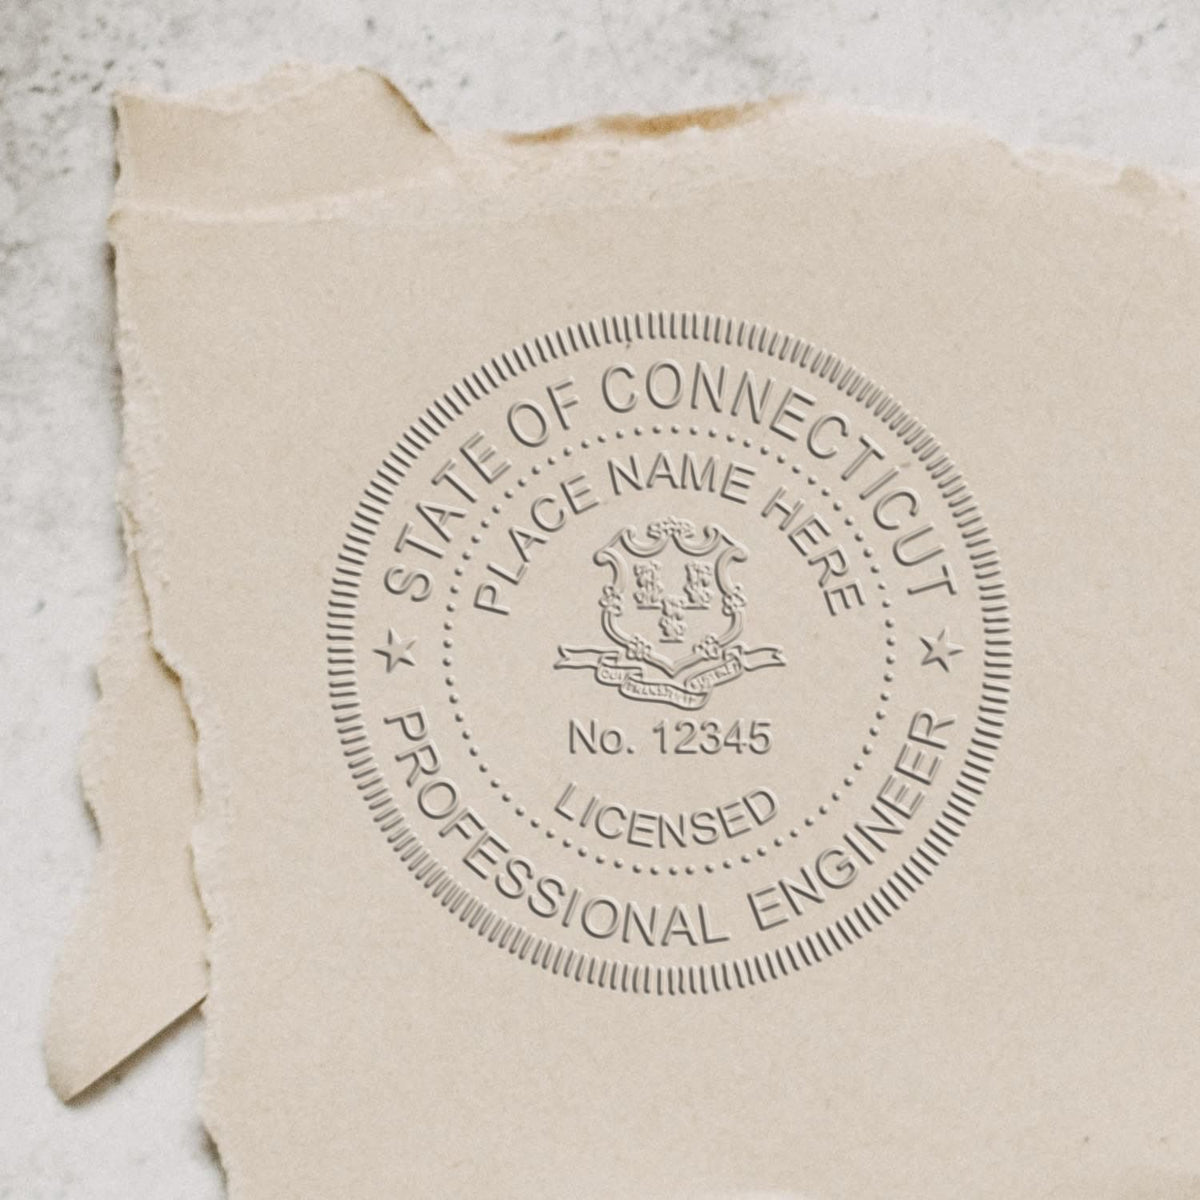 A photograph of the Soft Connecticut Professional Engineer Seal stamp impression reveals a vivid, professional image of the on paper.